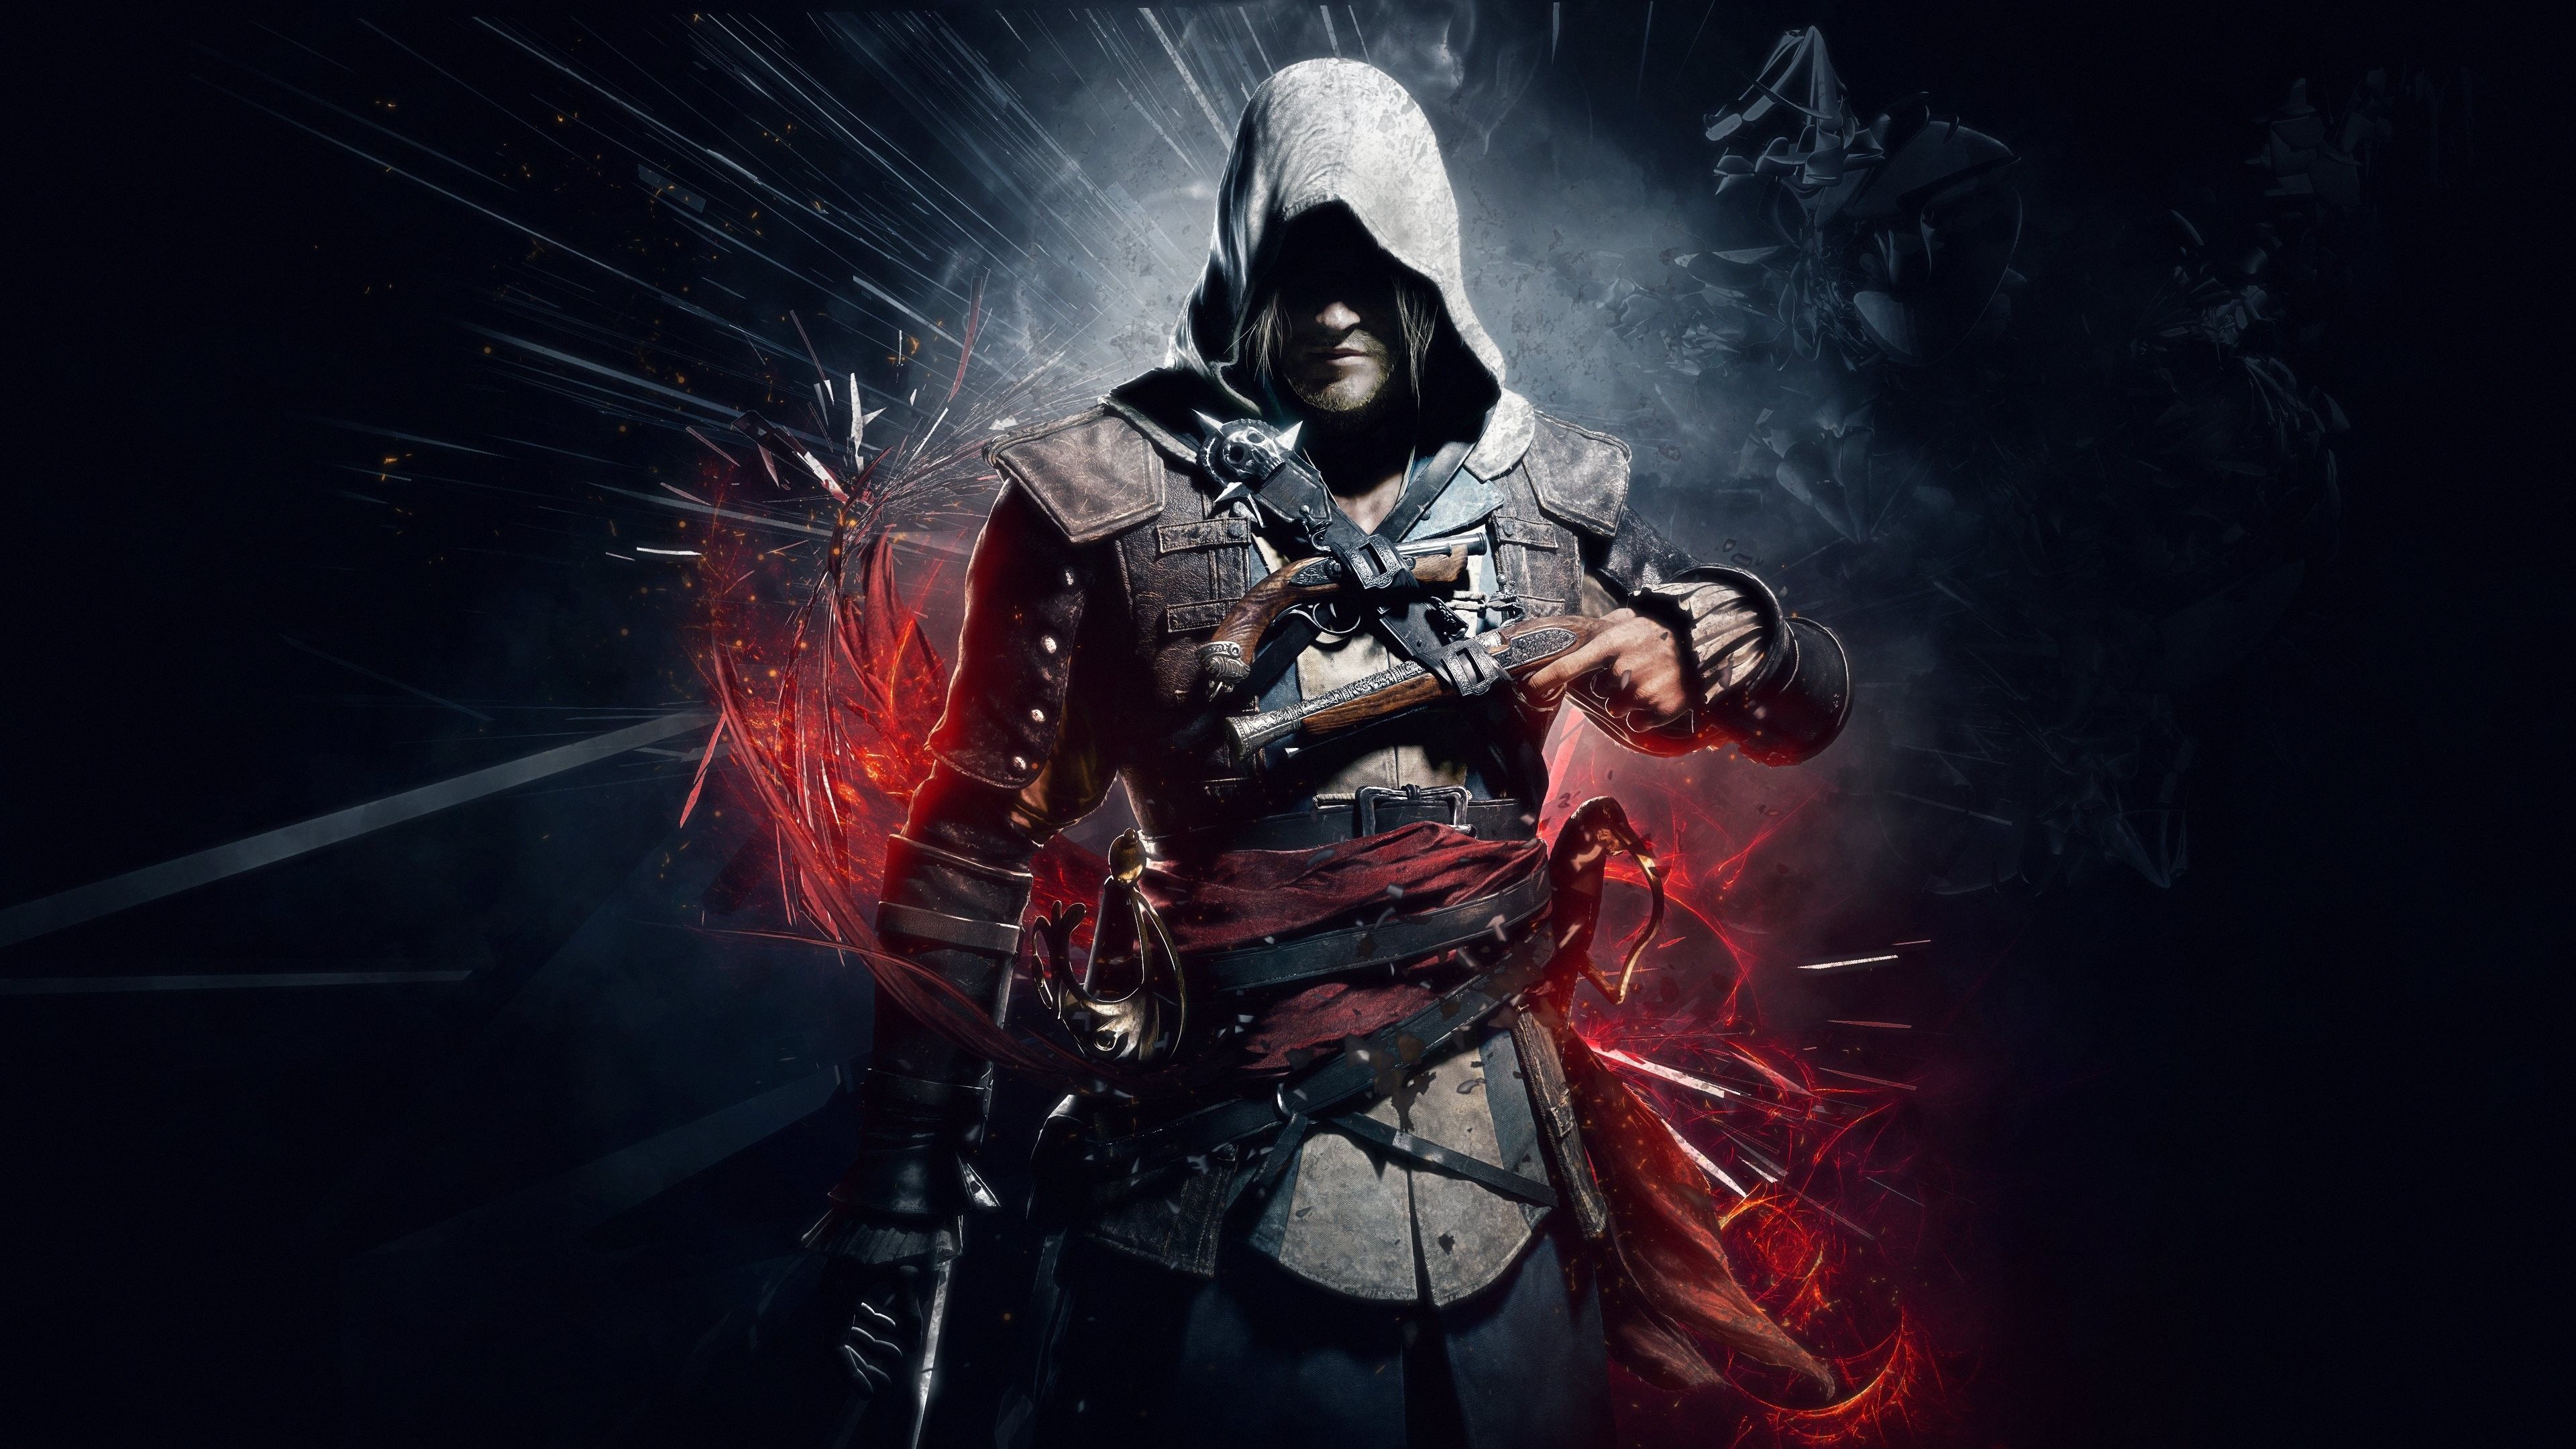 Assassins creed game k hd games k wallpapers images backgrounds photos and pictures